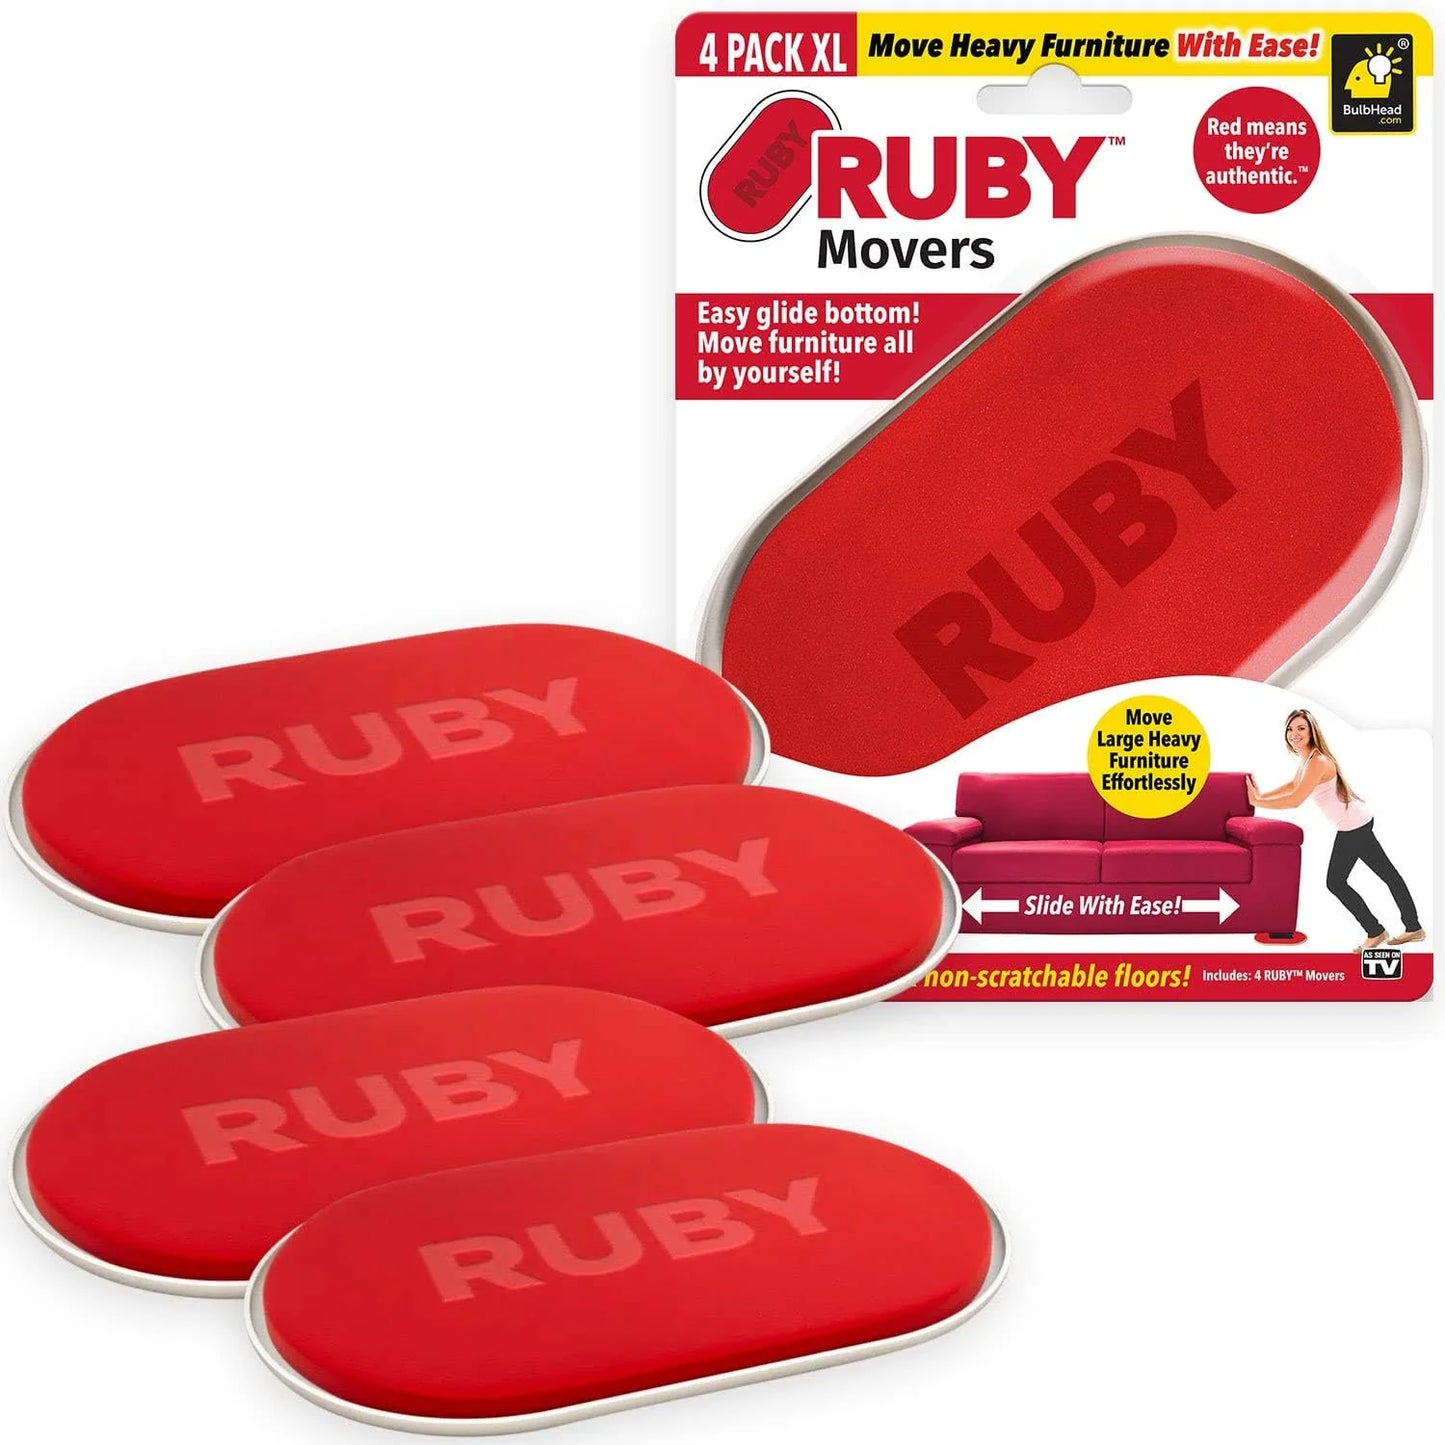 Ruby Movers Furniture Movers